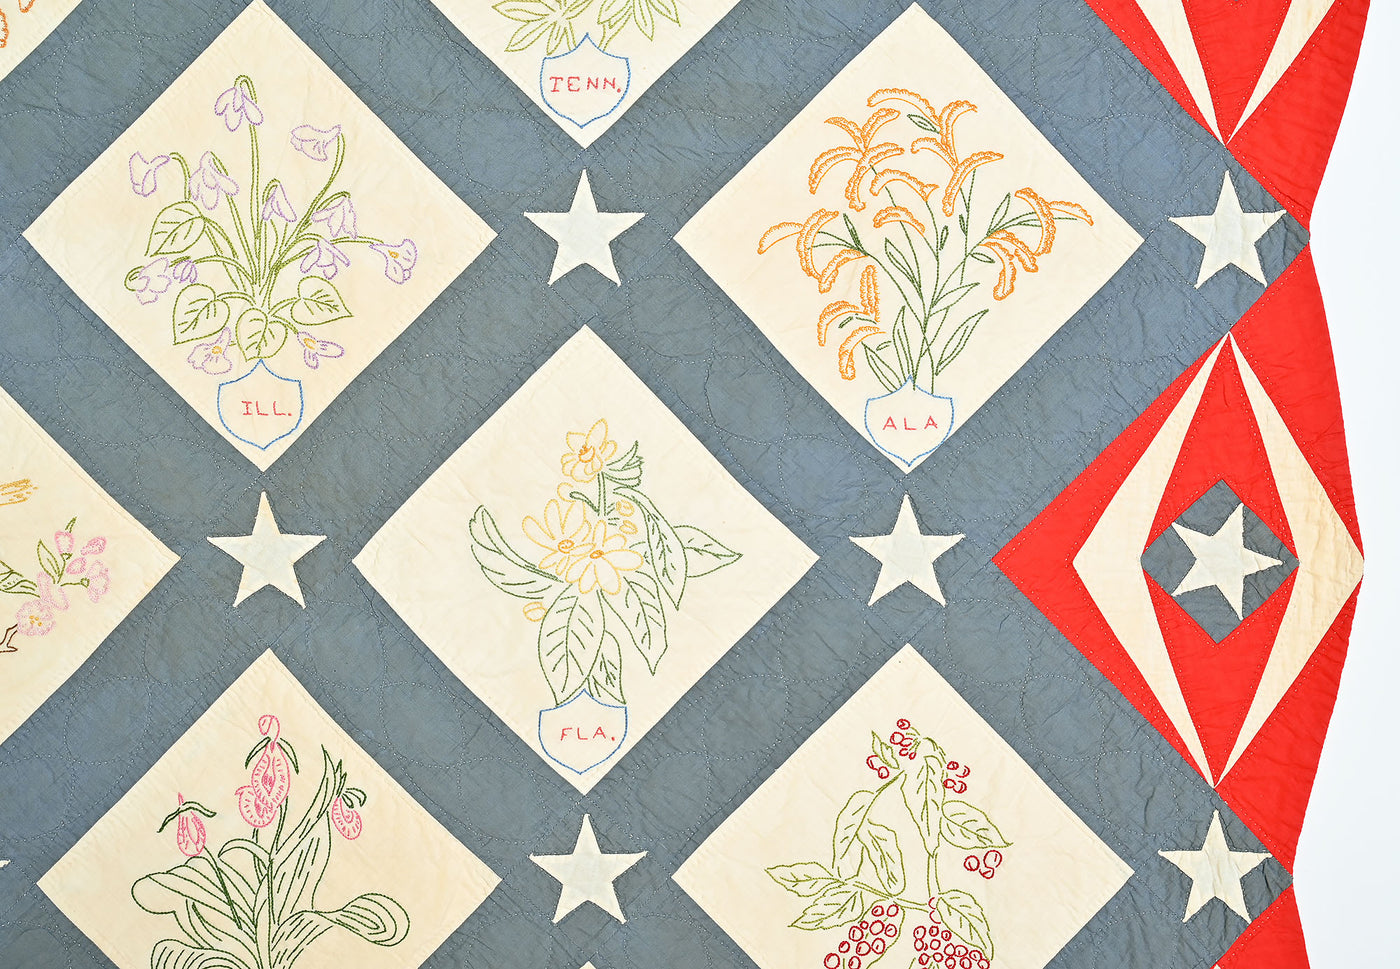 Detail view of embroidered state flowers and red border on quilt #1017. 